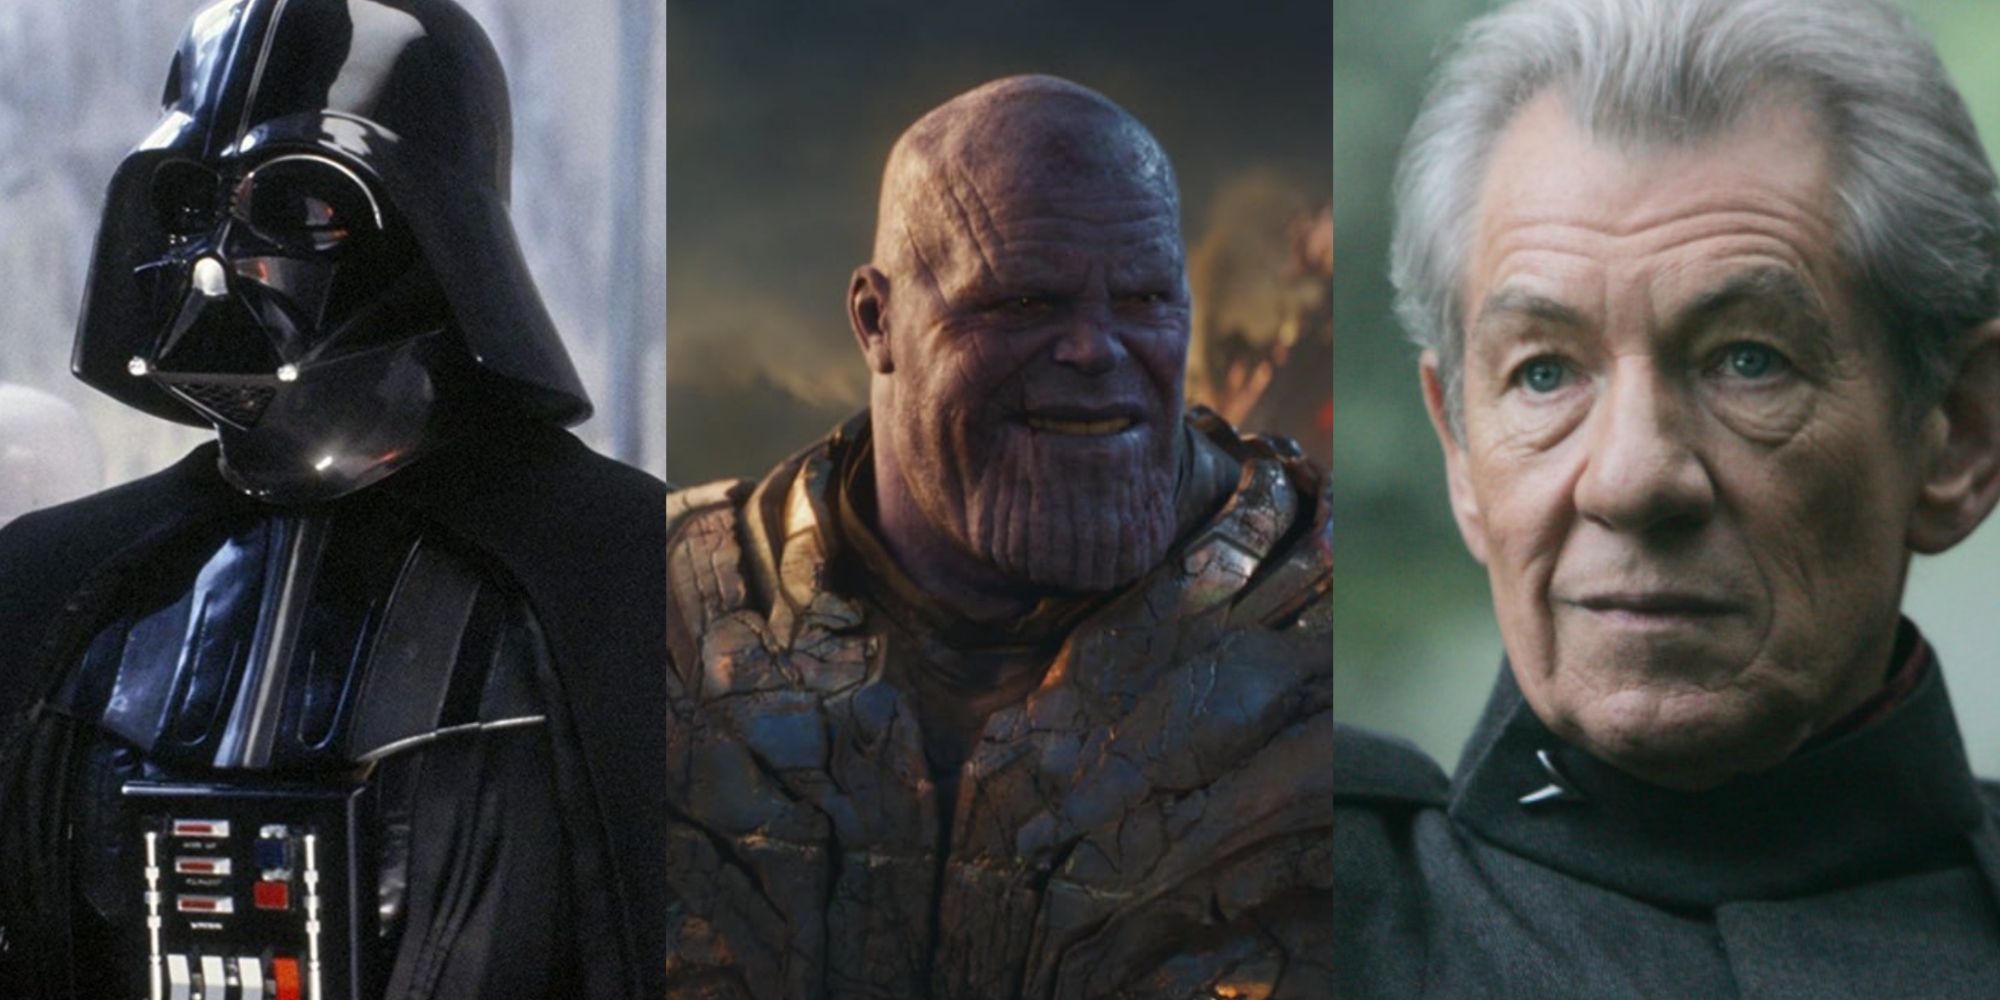 A montage of famous villains, featuring Darth Vader, Thanos and Magneto